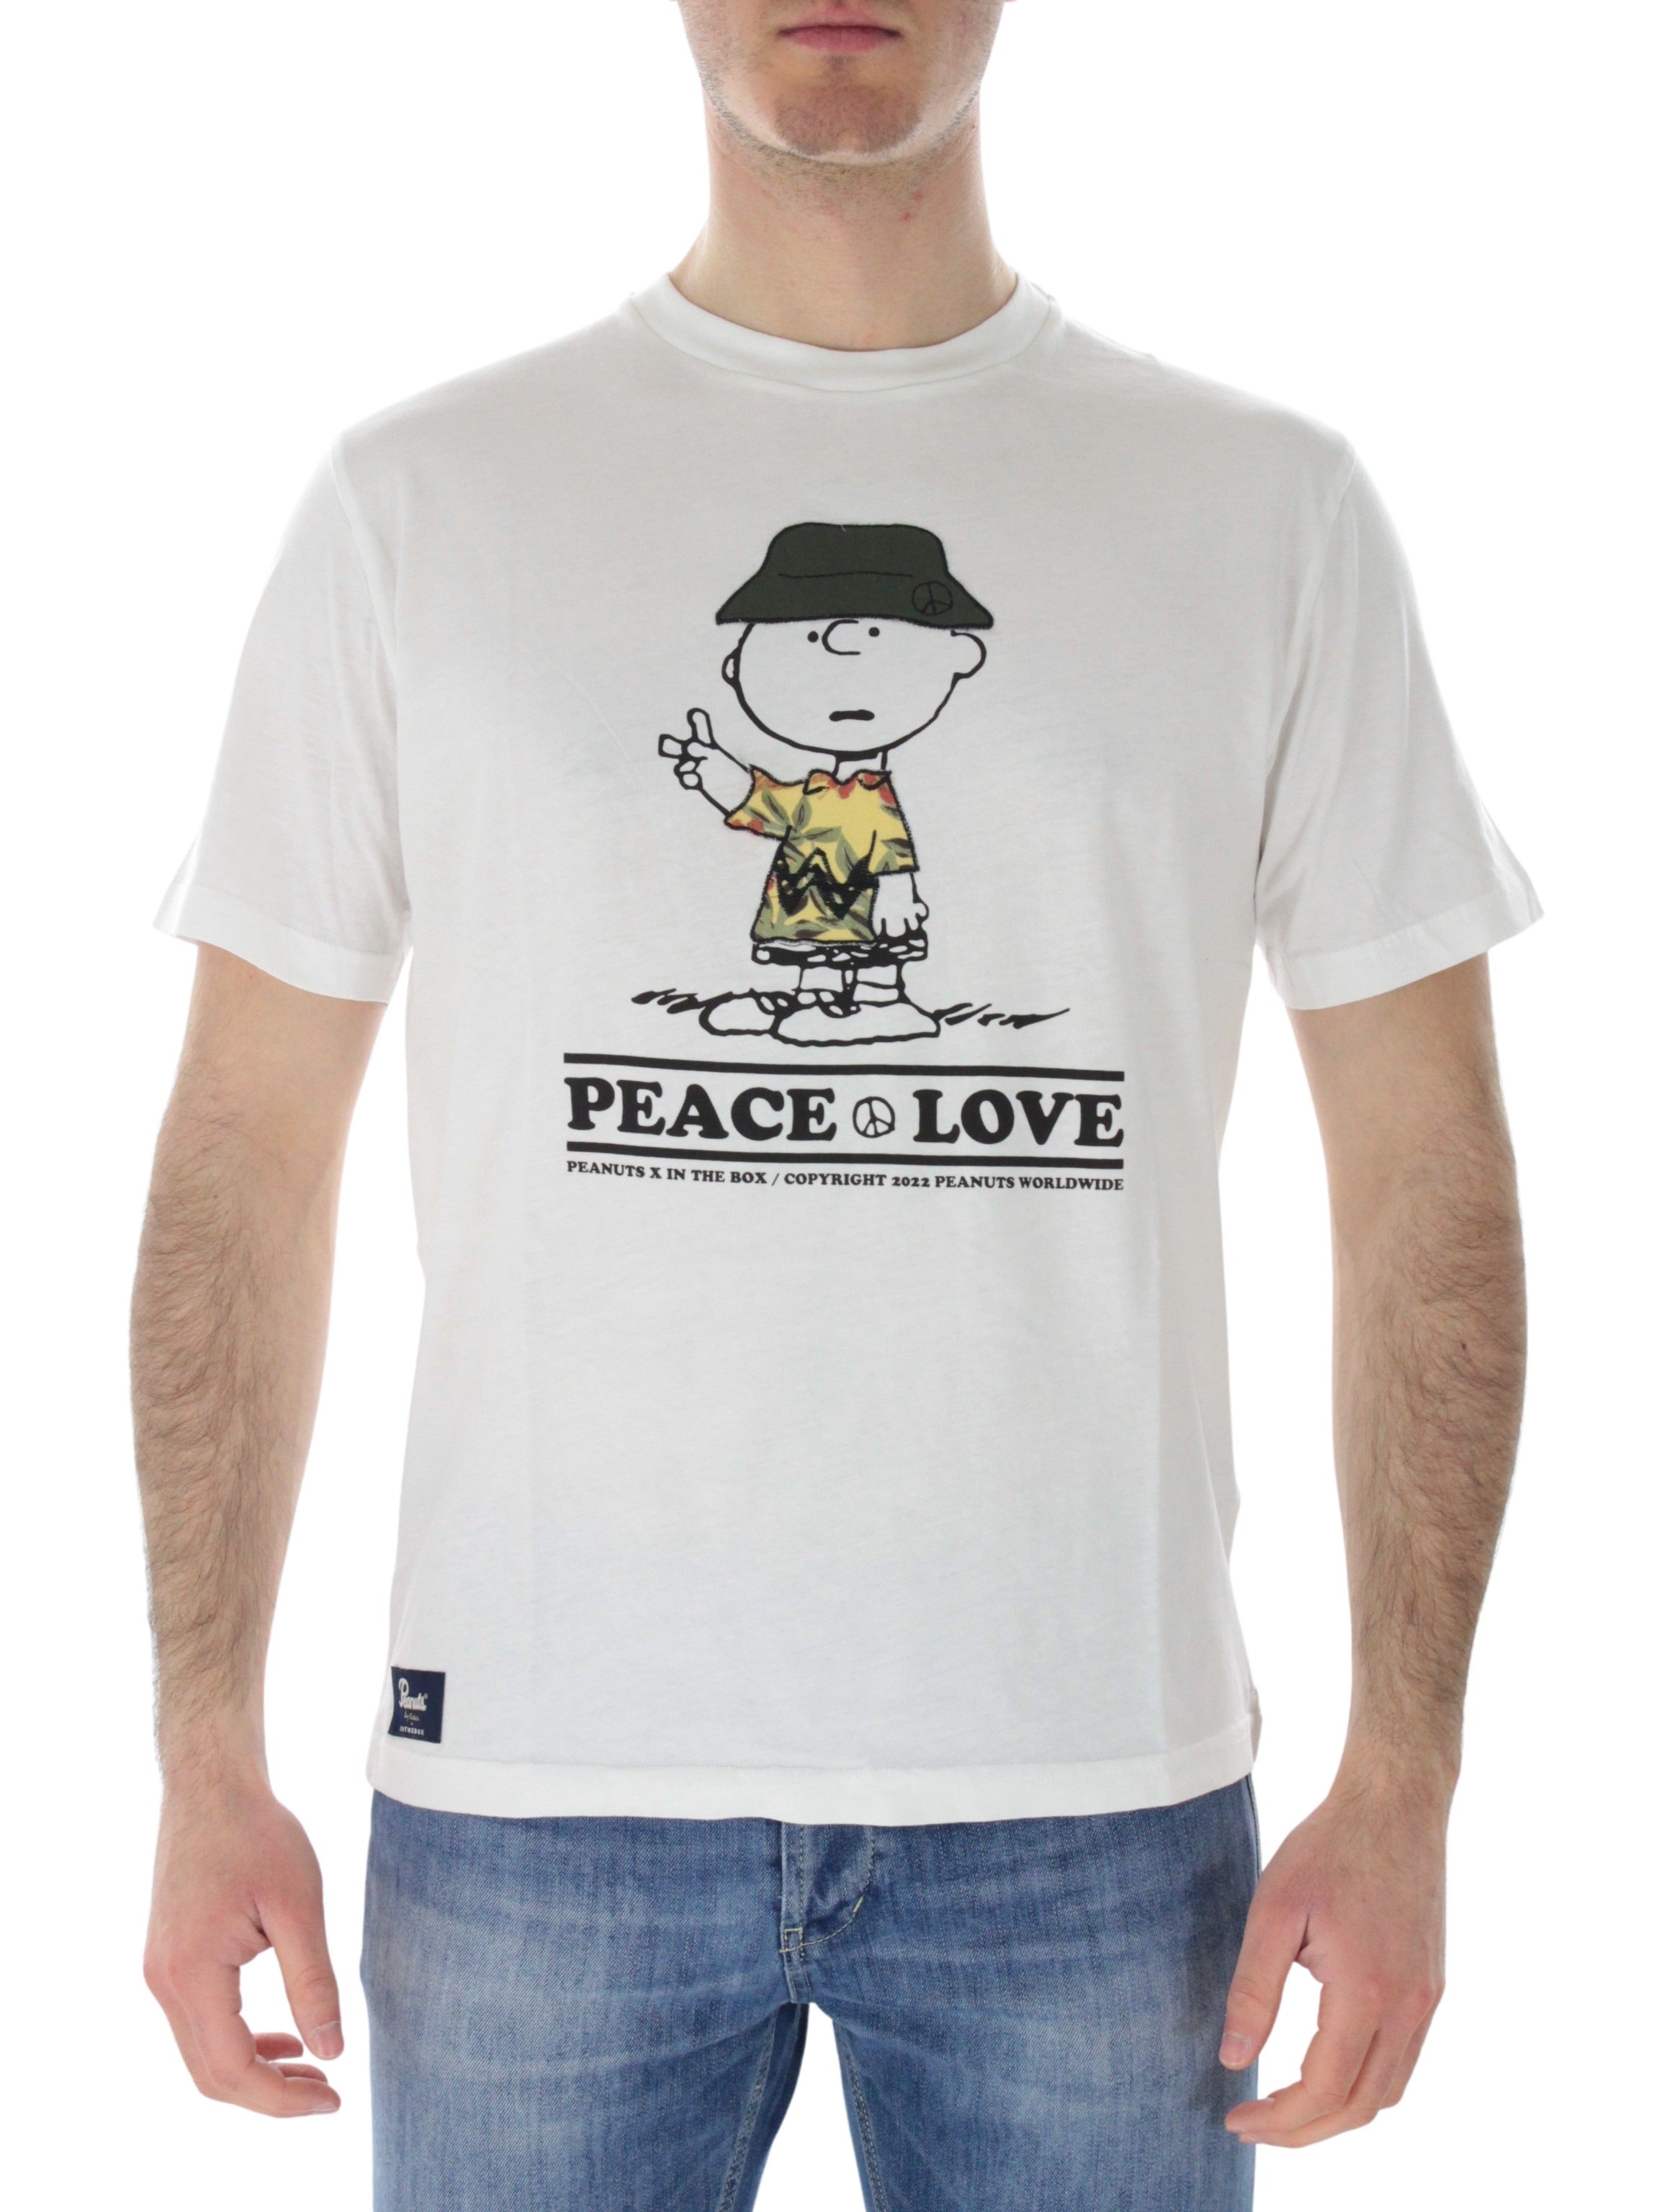 In the box t-shirt charlie brown peace&love